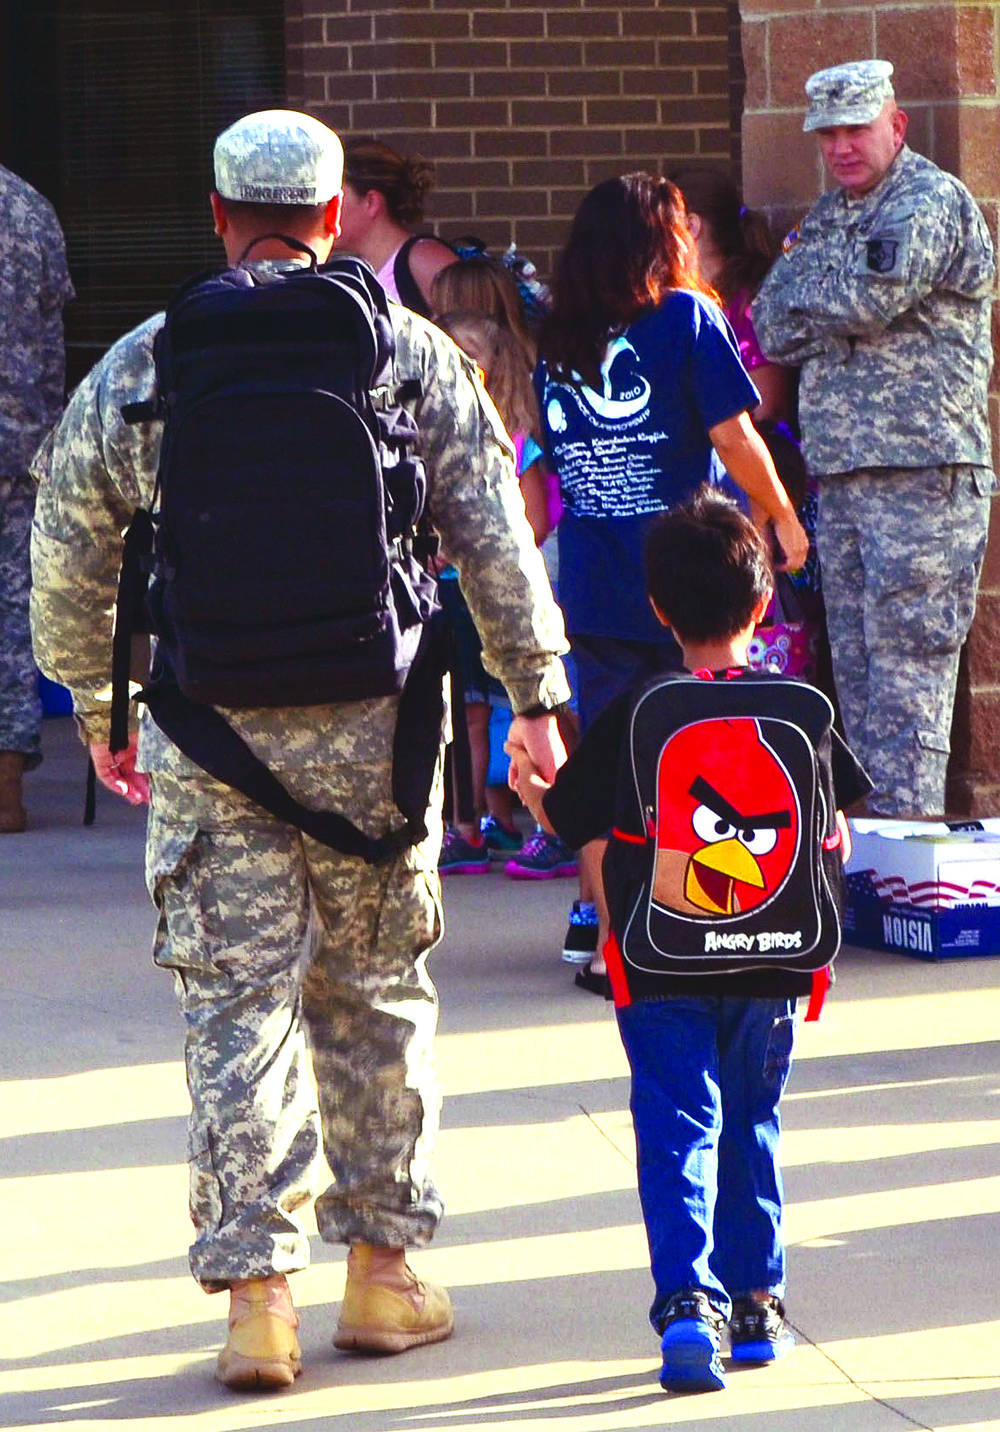 The return to school brings the joy of learning back to Fort Campbell students